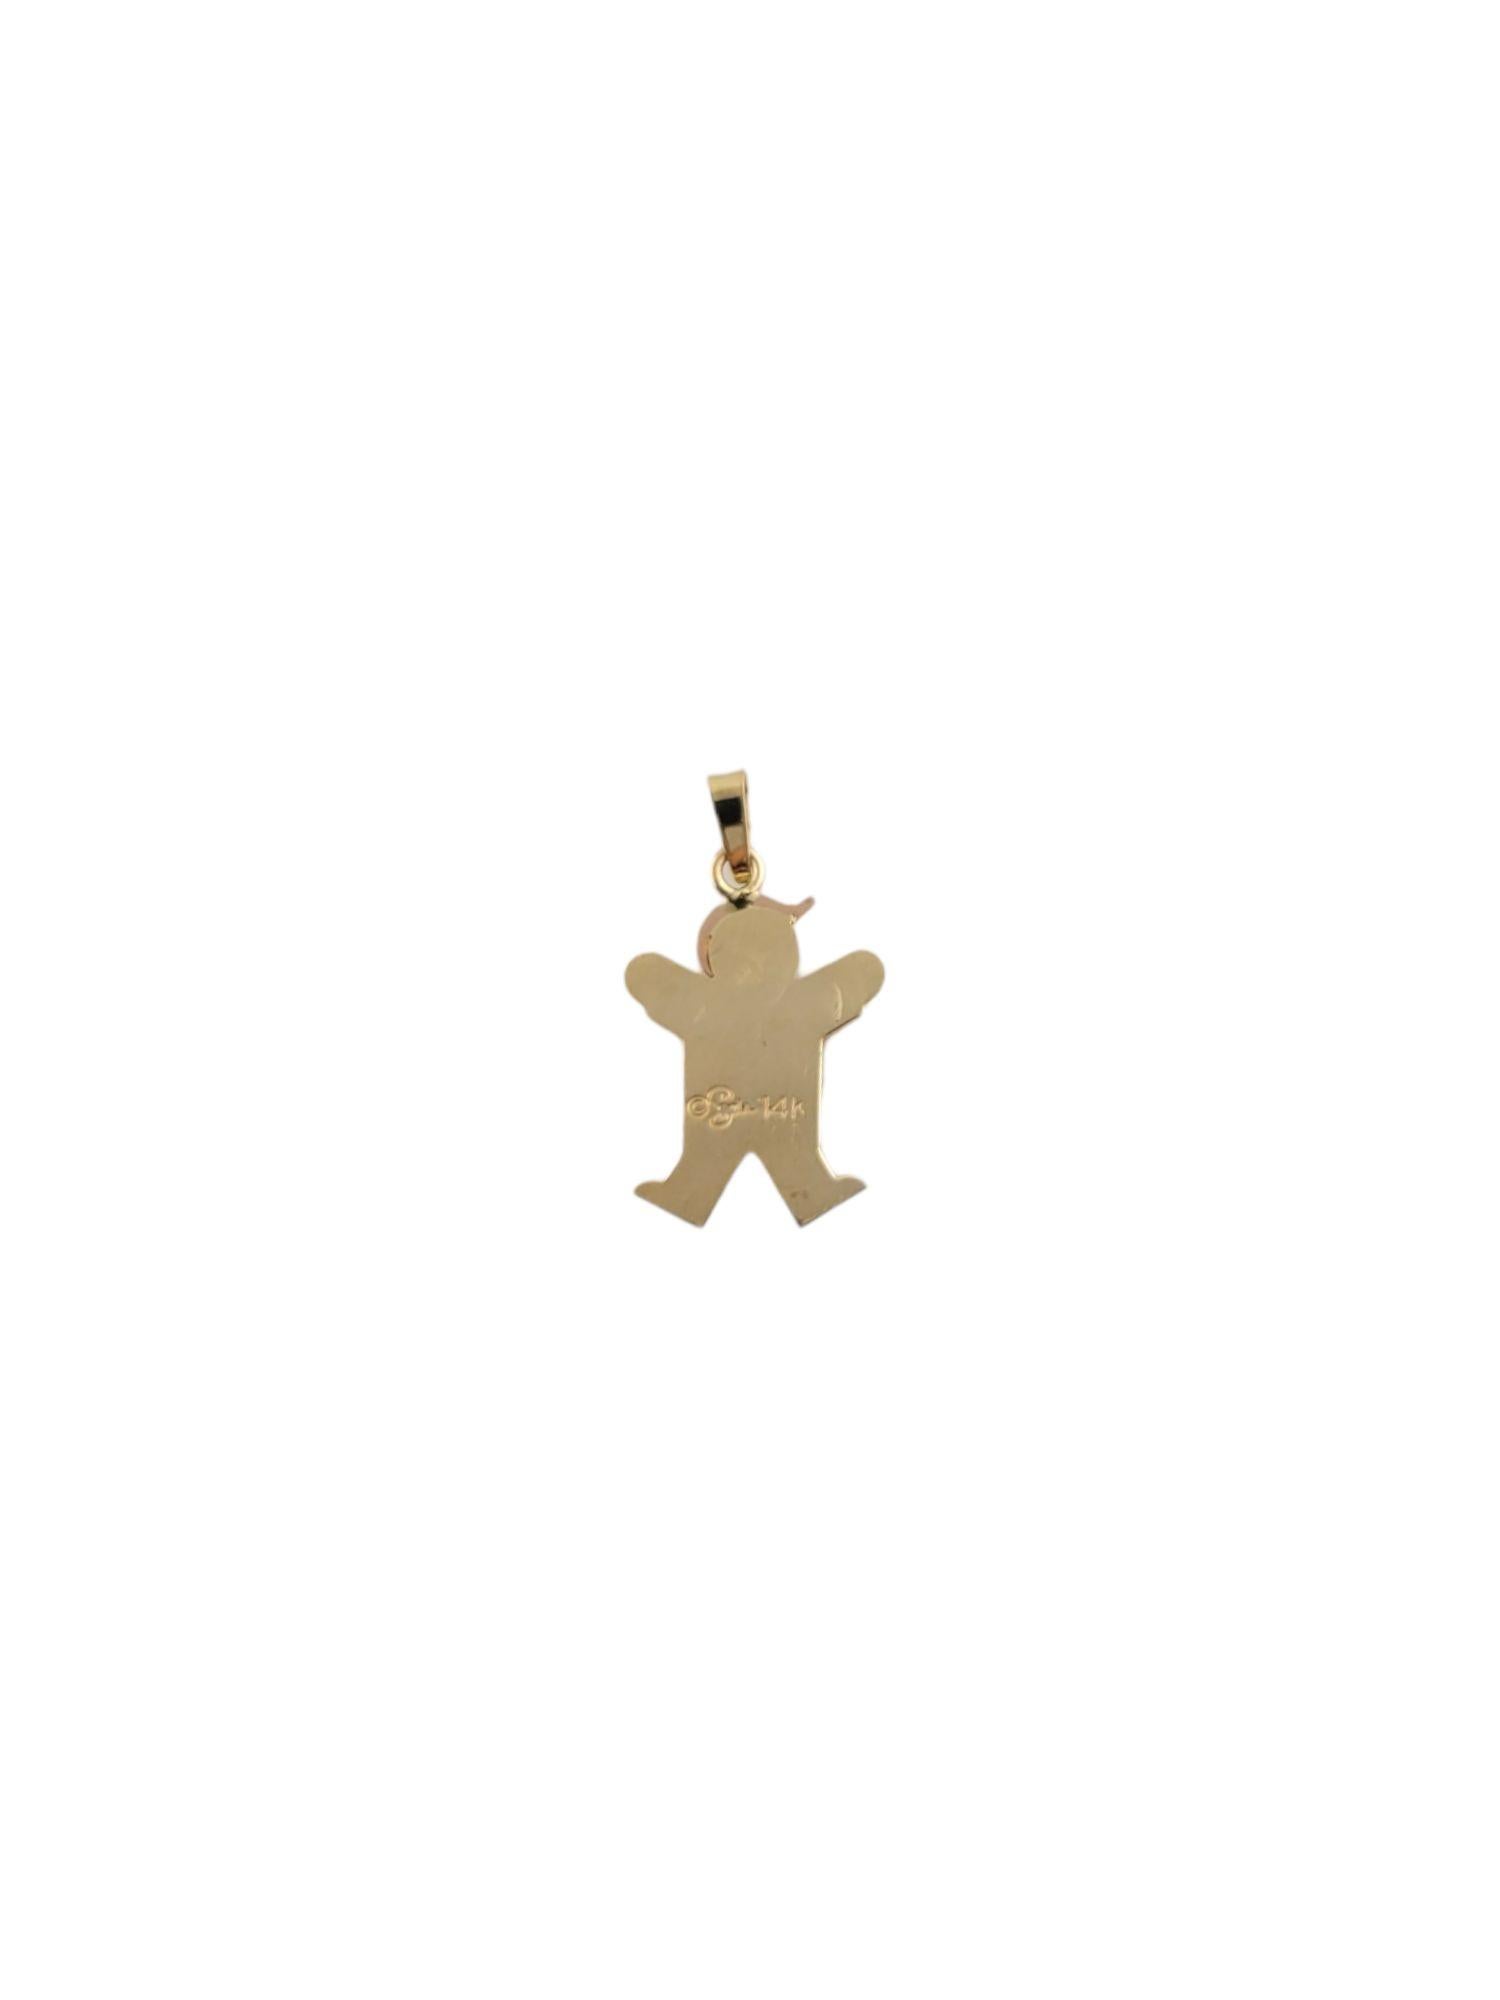 Adorable little boy charm goes from a matt finish to a shiny finish. This charm is made from 14k yellow gold with hints of rose gold in the baseball cap.

Dimensions: 20mm X 14mm

Weight:  1.4gr / 0.9dwt

Hallmark: c 14K

Very good condition,